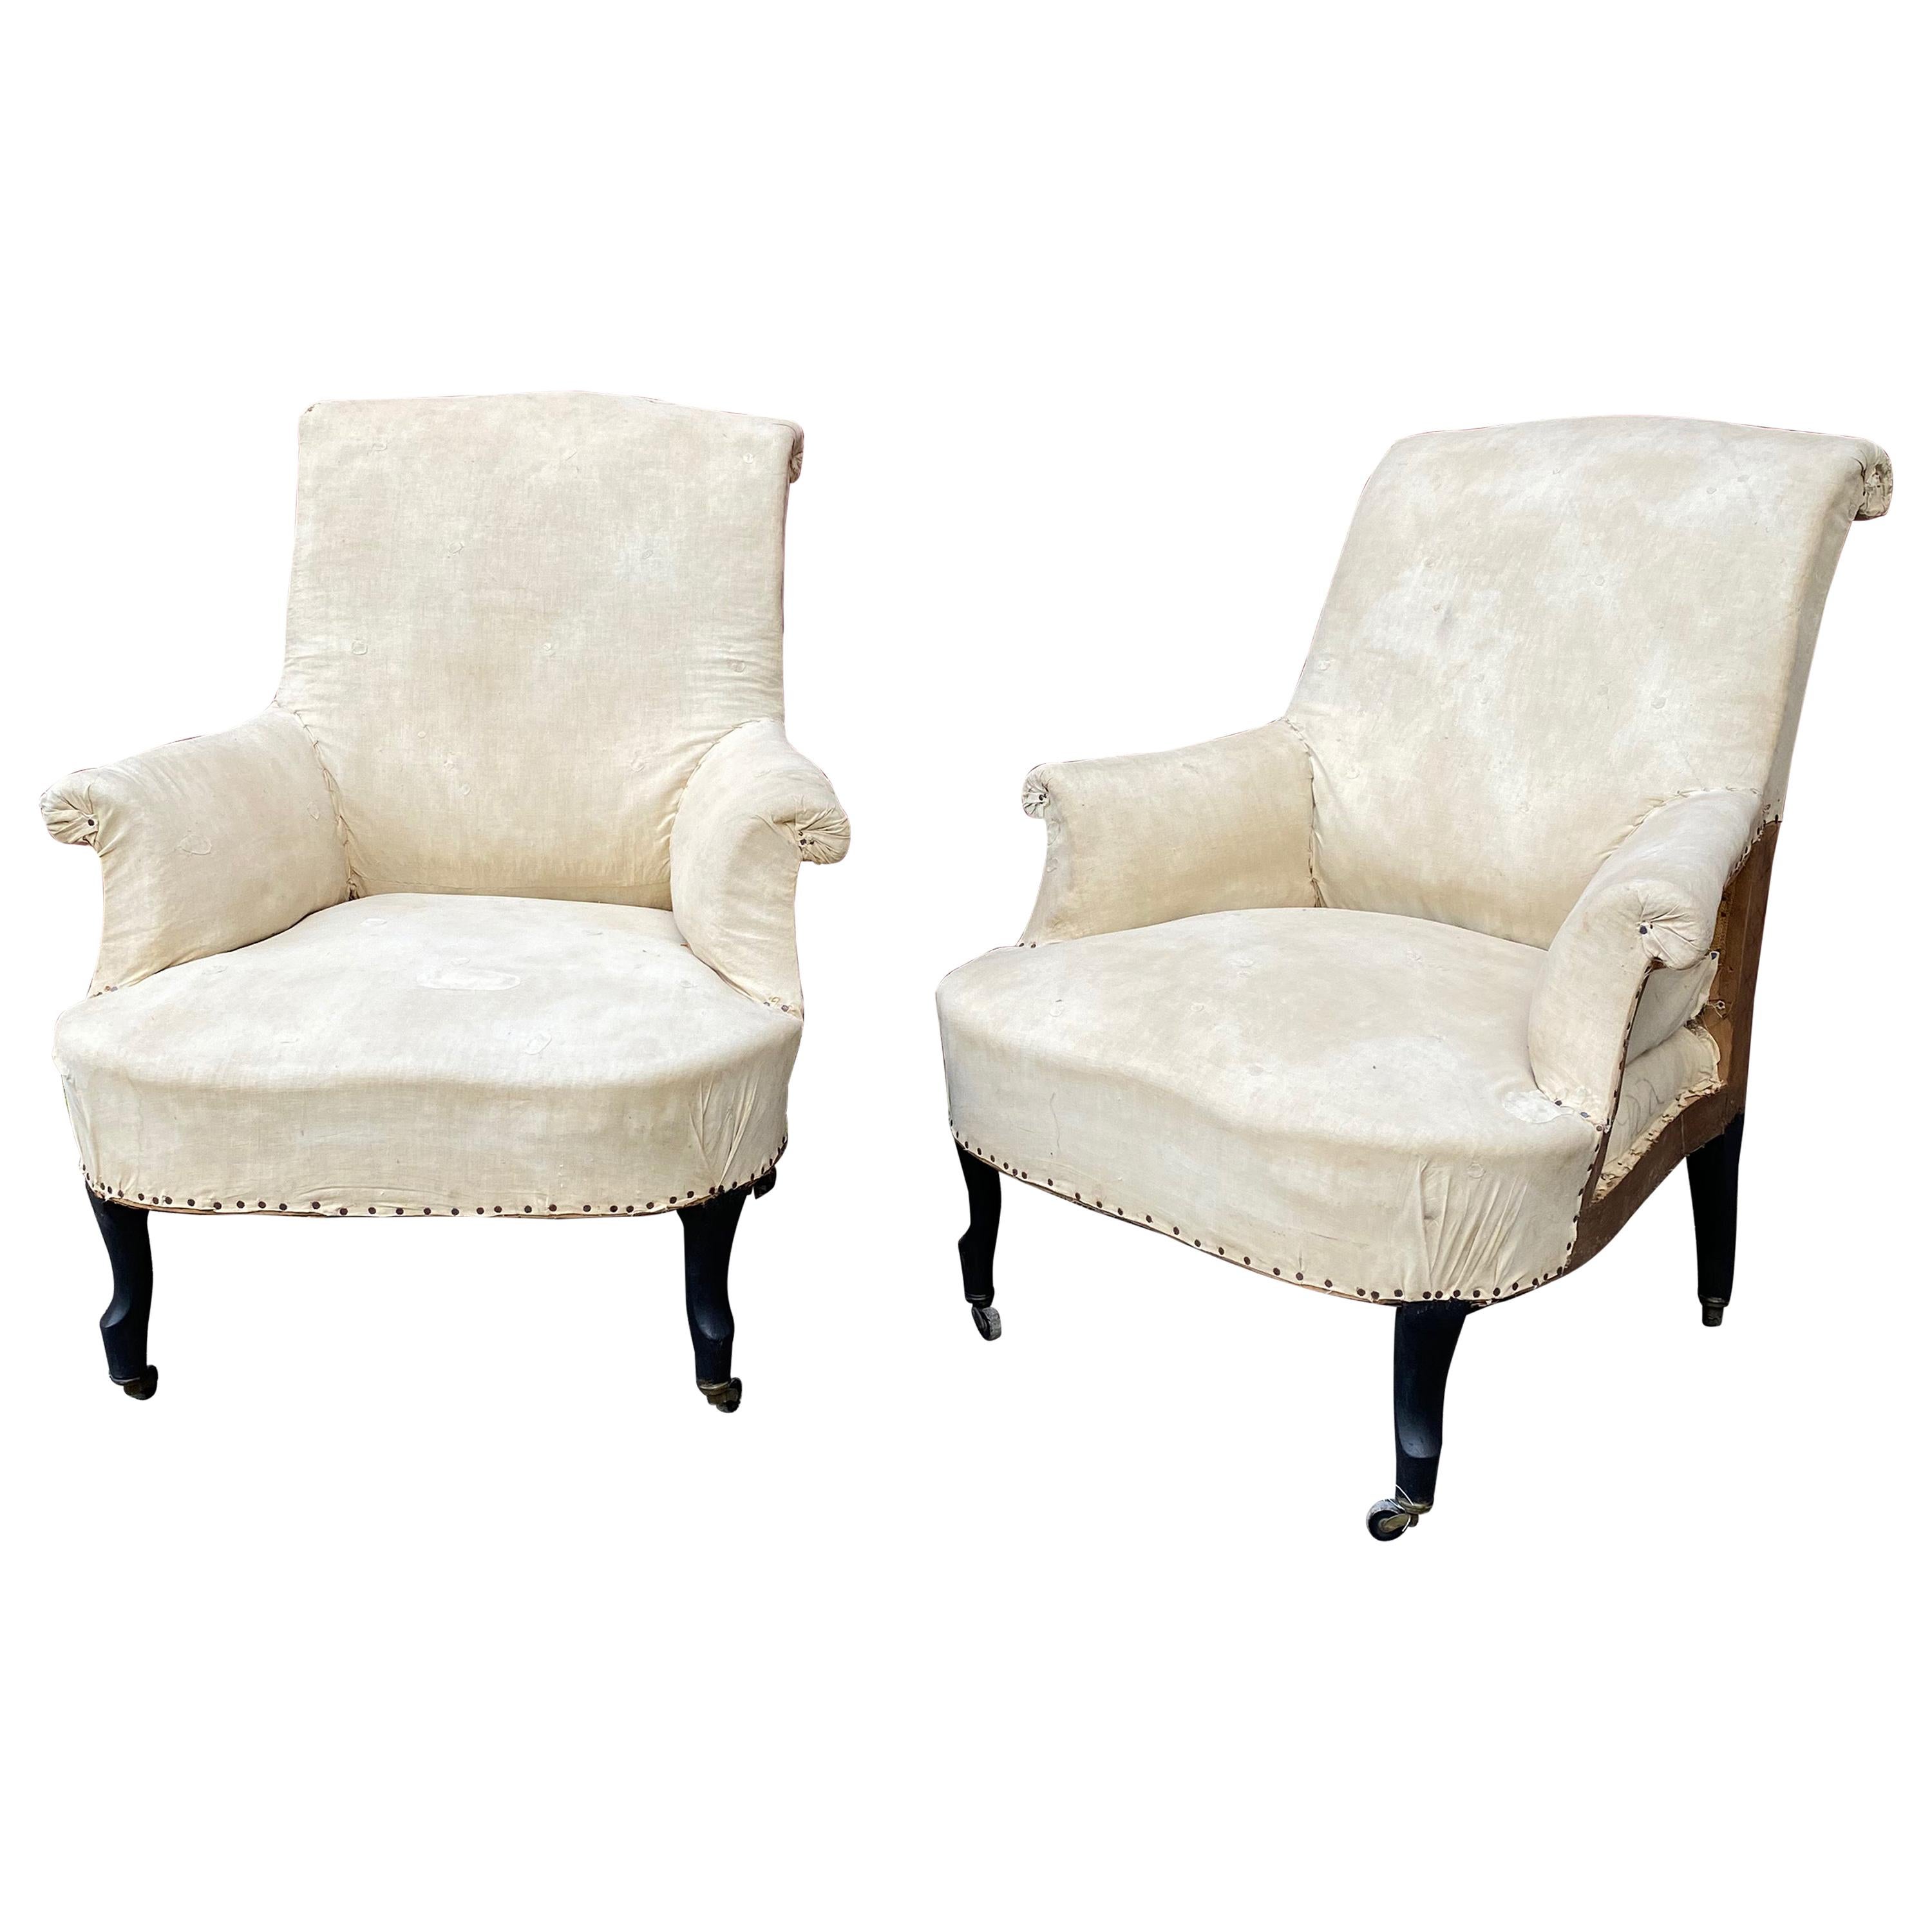 Pair of French Scrolled Back Armchairs